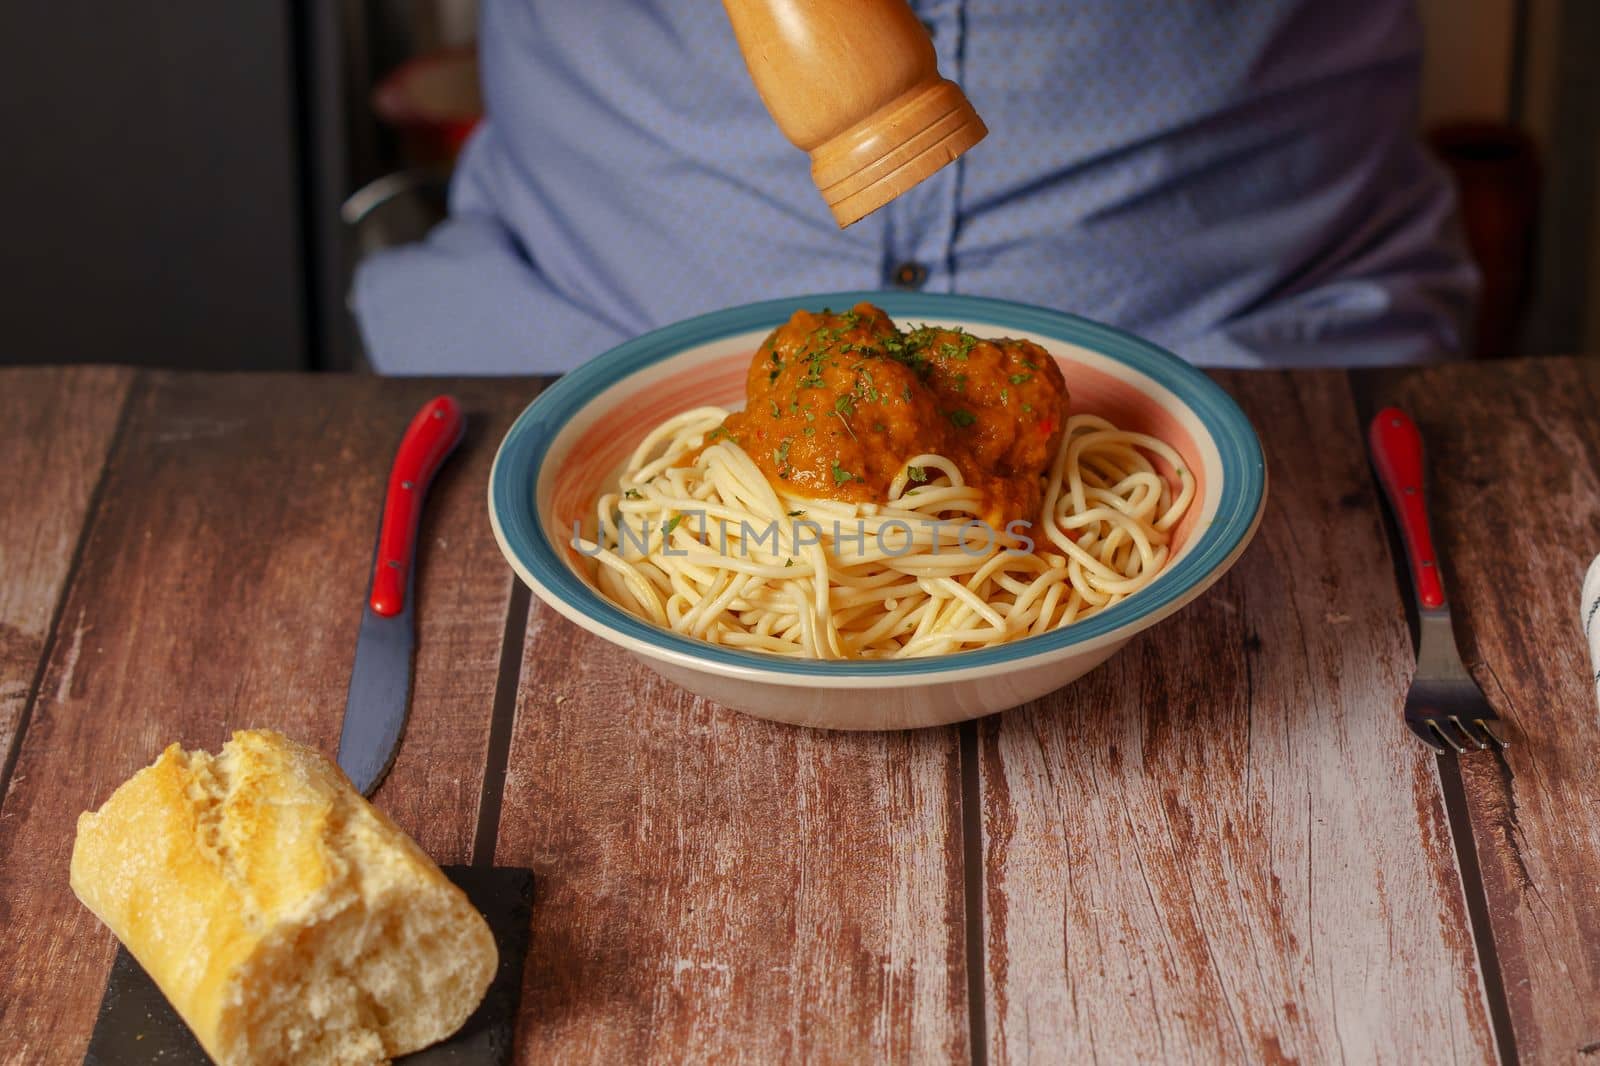 man in blue shirt pouring pepper on a plate of meatballs and pasta with a wooden pepper shaker